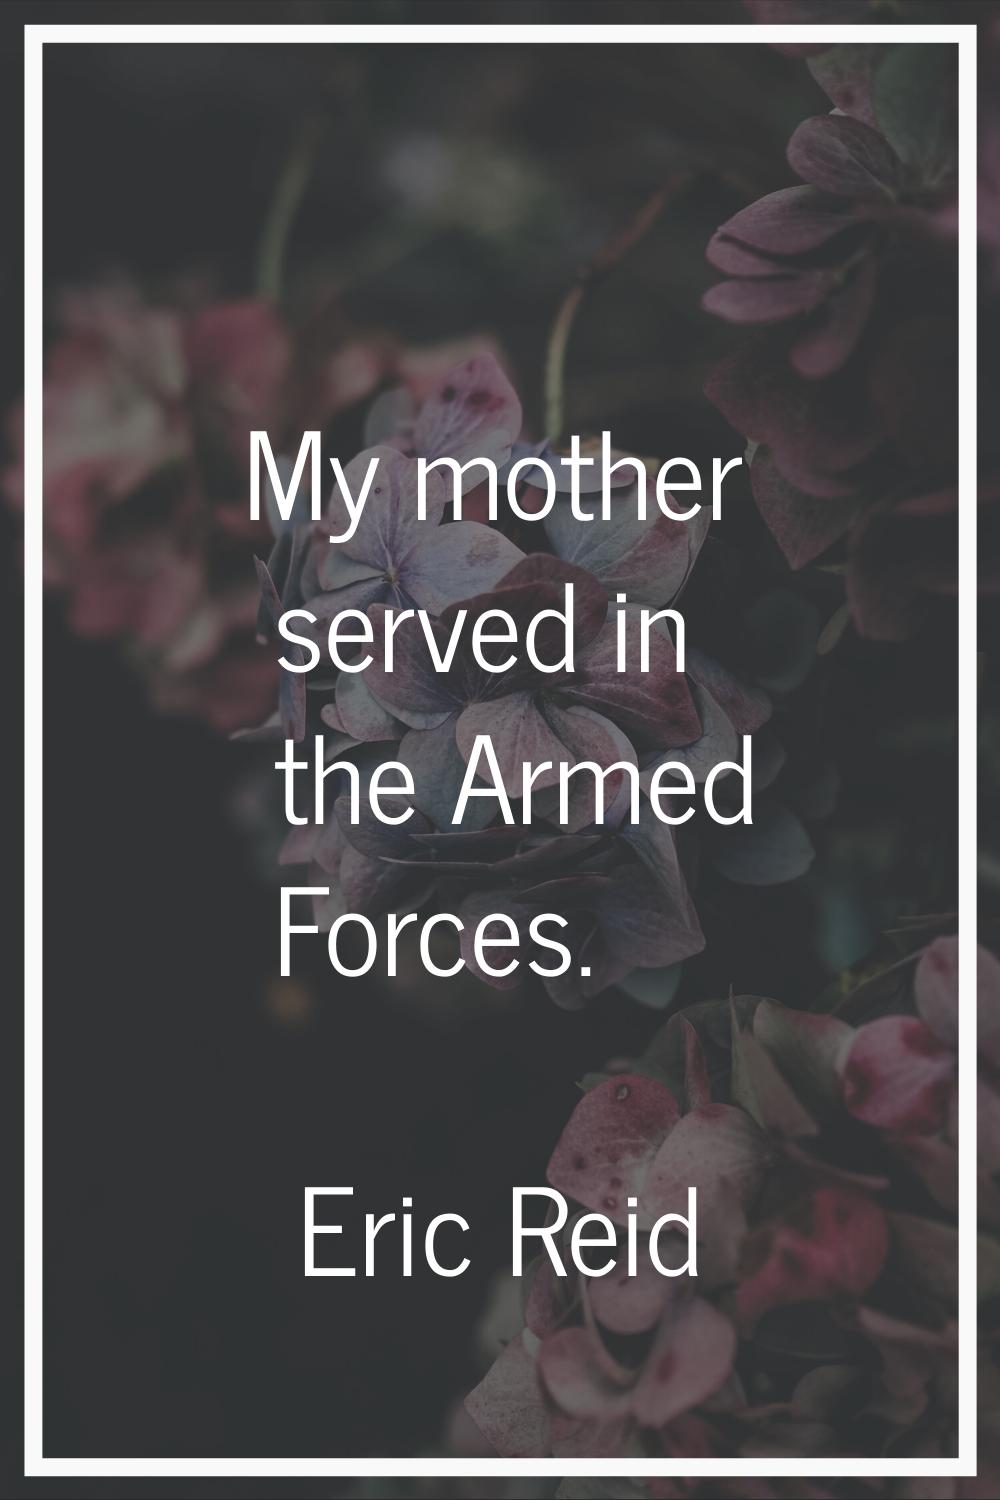 My mother served in the Armed Forces.